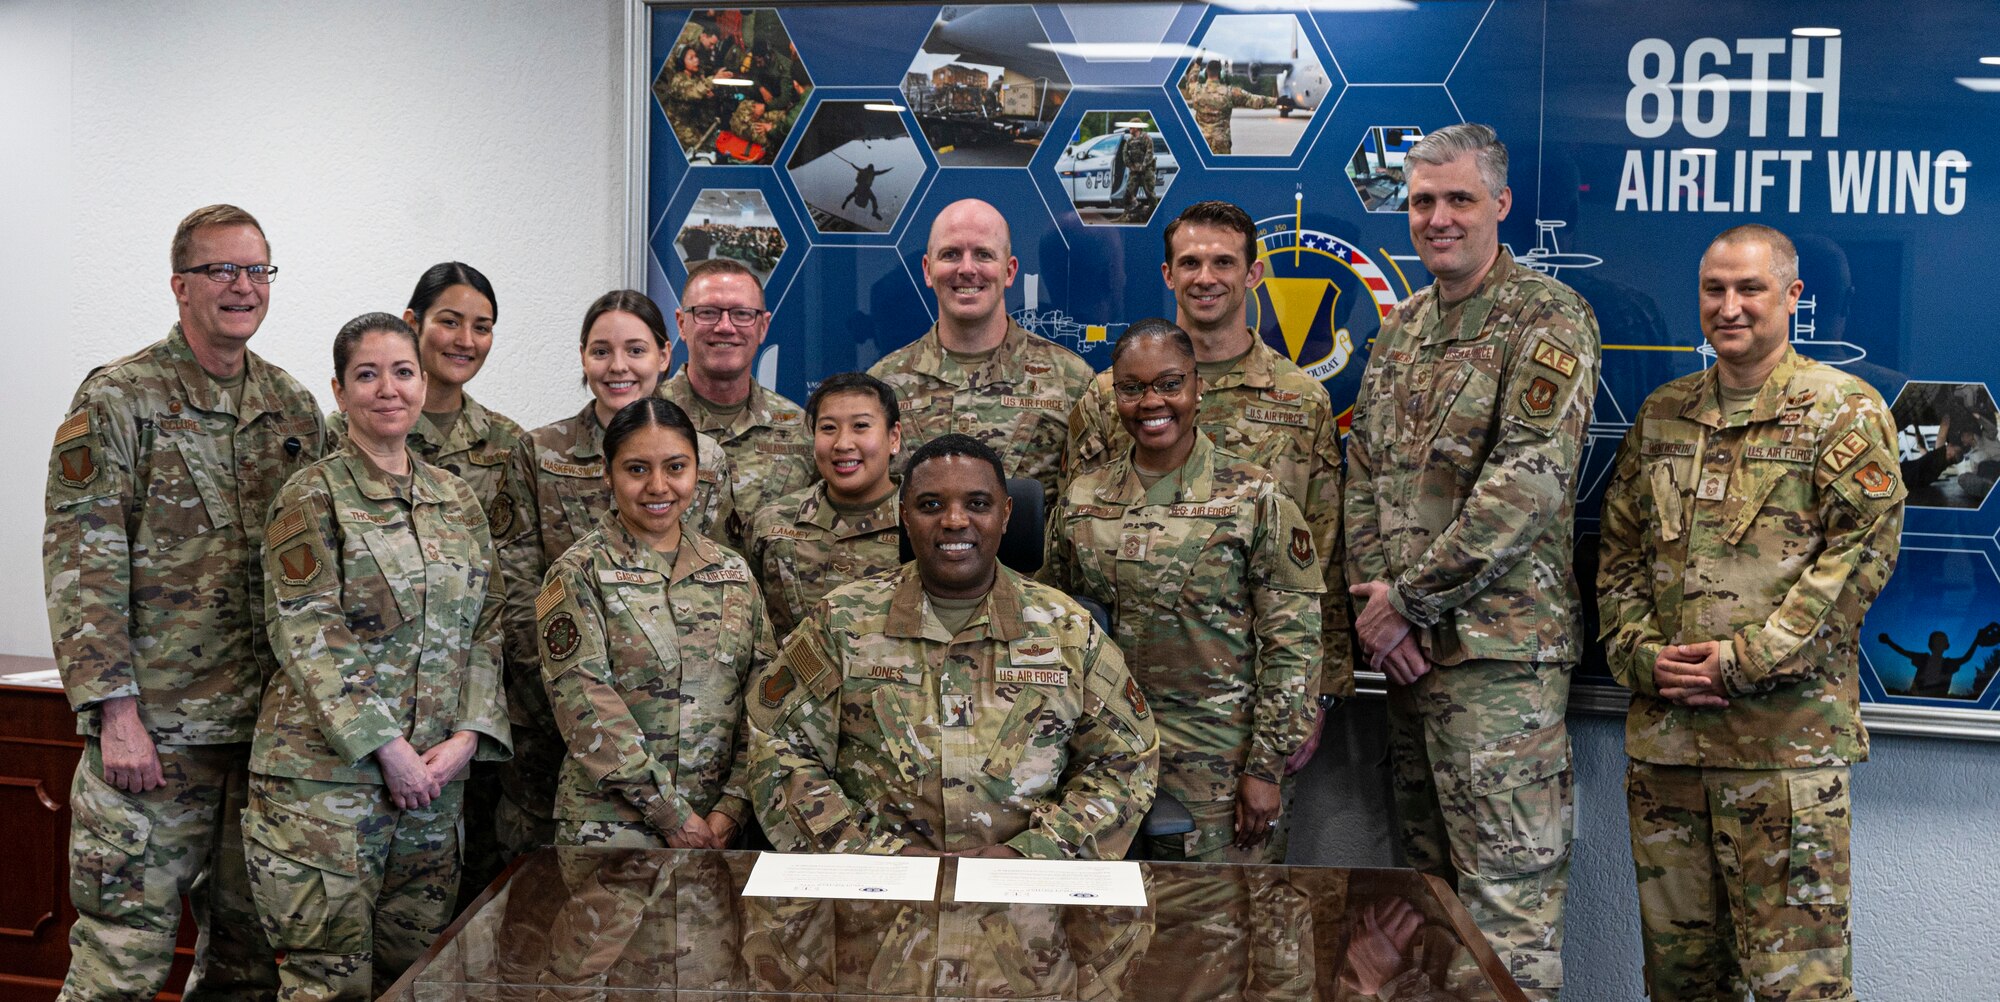 U.S. Air Force Brig. Gen. Otis Jones, 86th Airlift Wing commander, center, poses for a photo with members from the 86th Medical Group after signing the Nurse and Tech Week Memorandum at Ramstein Air Base, May, 8, 2023. Nurse and Tech Week was created in honor of Florence Nightingale, who was responsible for pioneering and standardizing nursing practices in the late 19th Century and many of the processes are still used today. (U.S. Air Force photo by Senior Airman Thomas Karol)